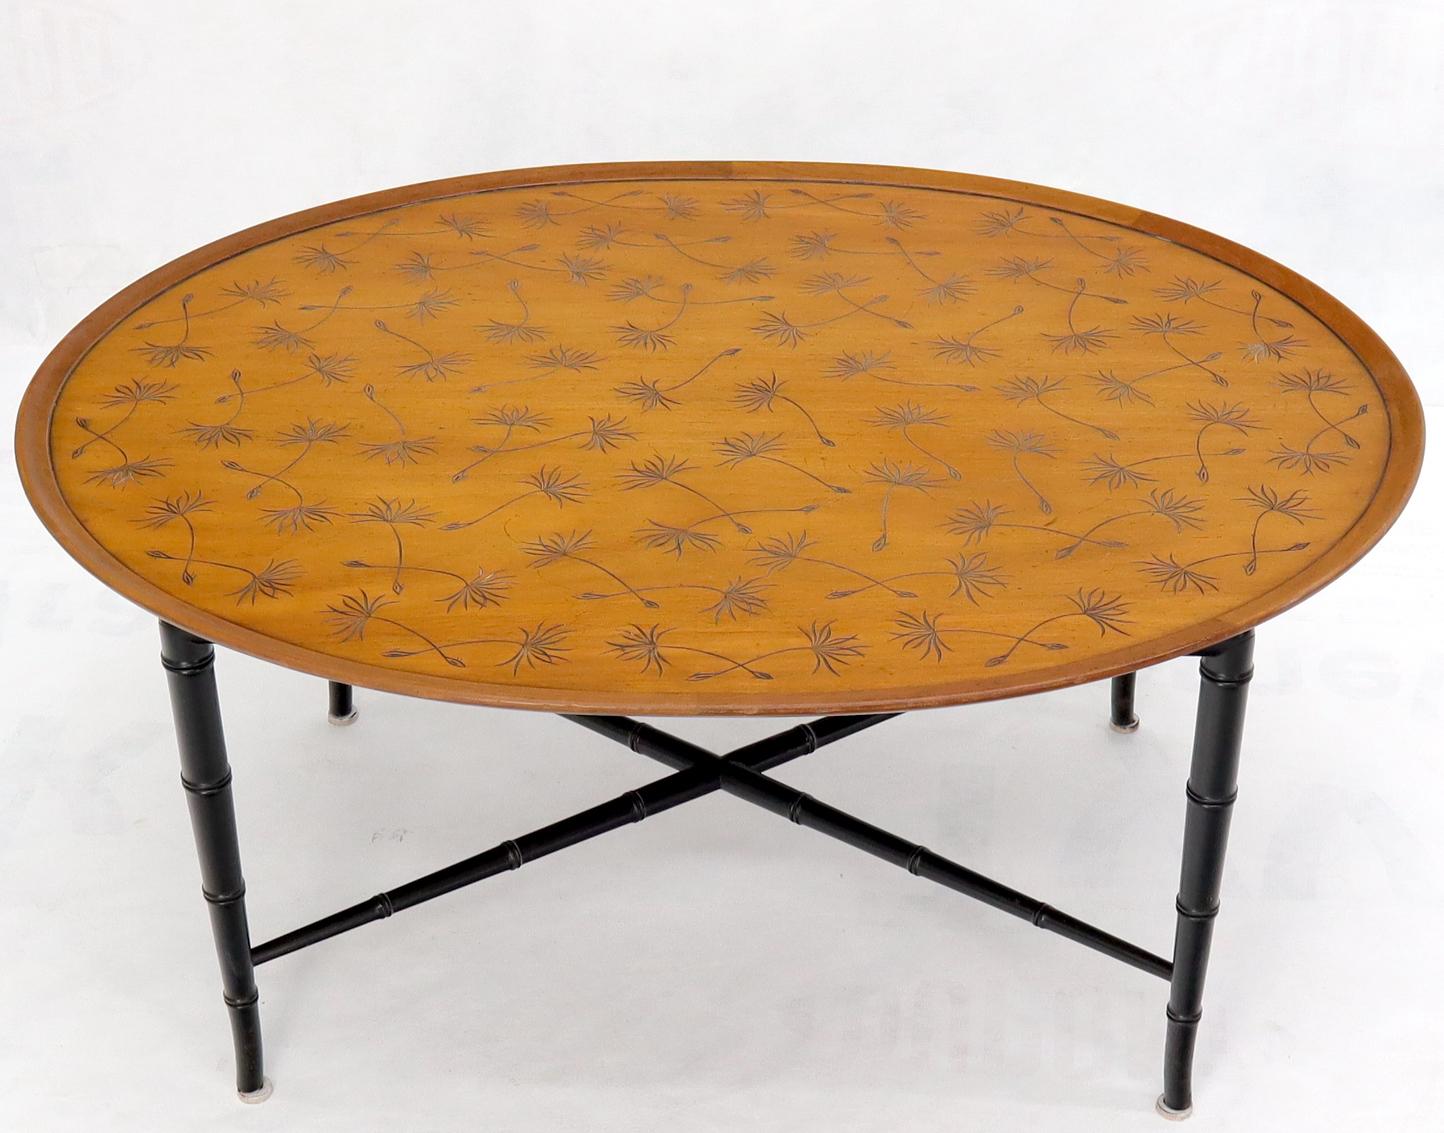 Oval Kittinger Coffee Table Faux Bamboo Tapered Legs Incised Leafs Design on Top For Sale 2